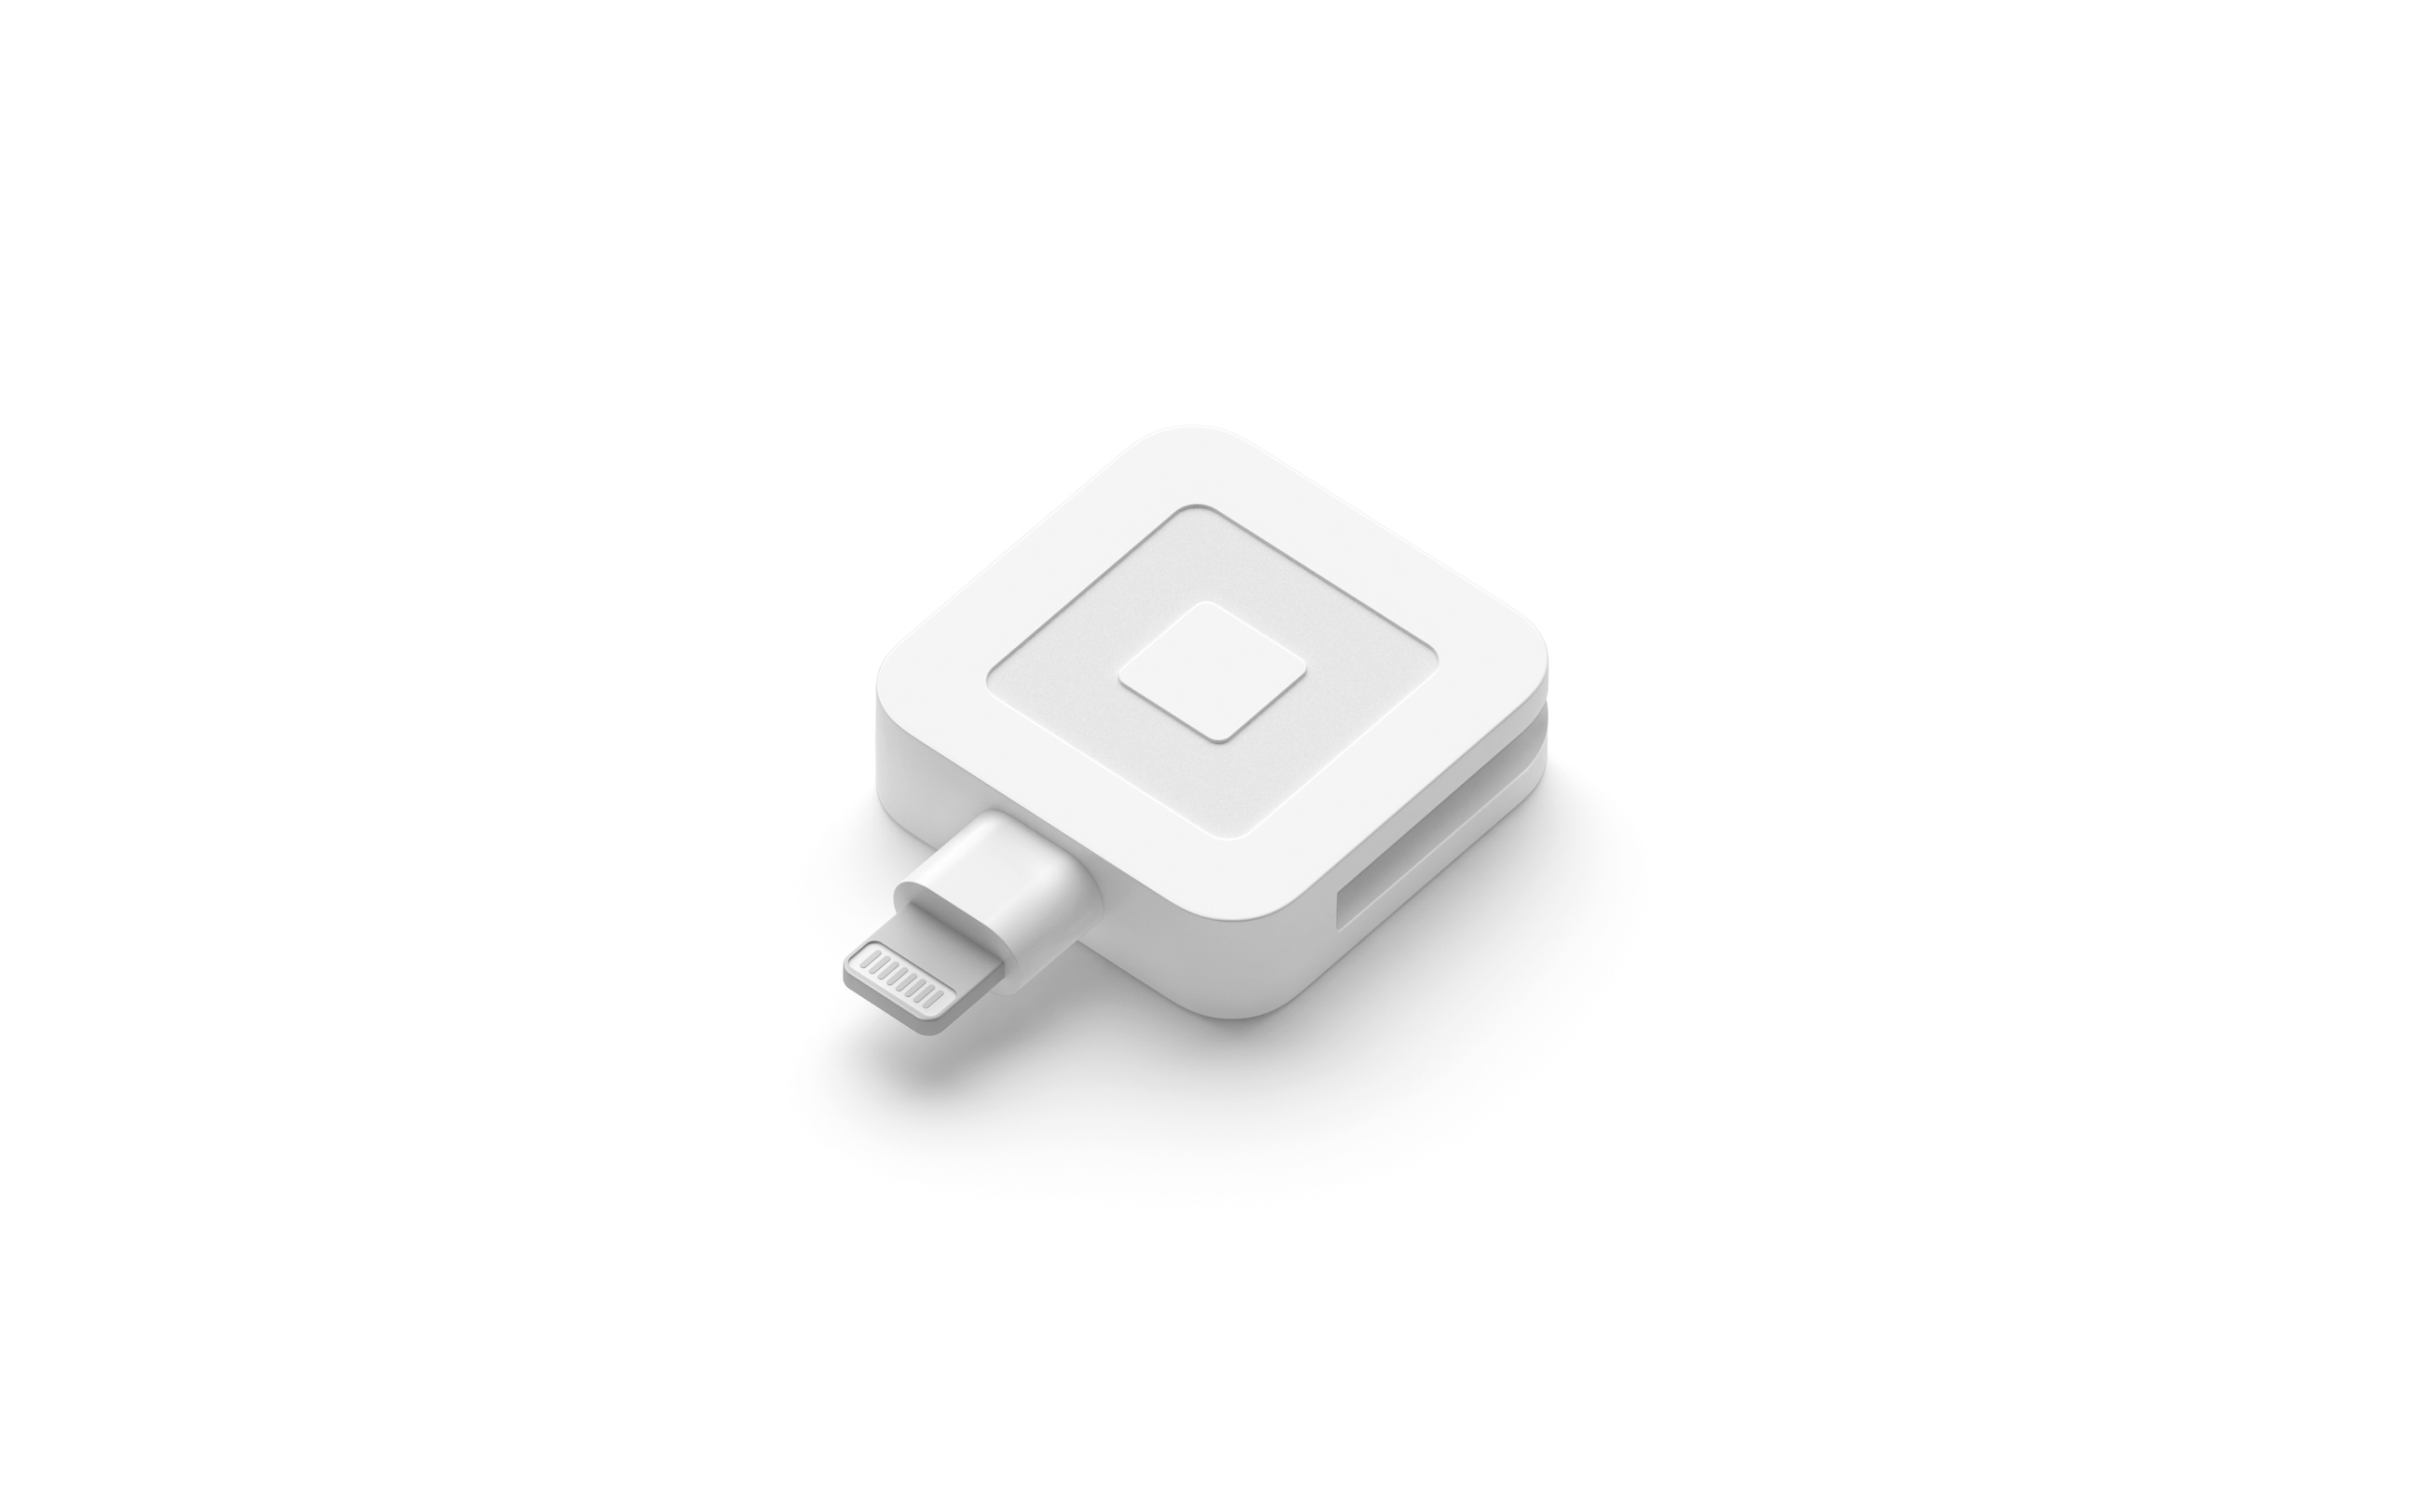 apple credit card reader adapter made by apple